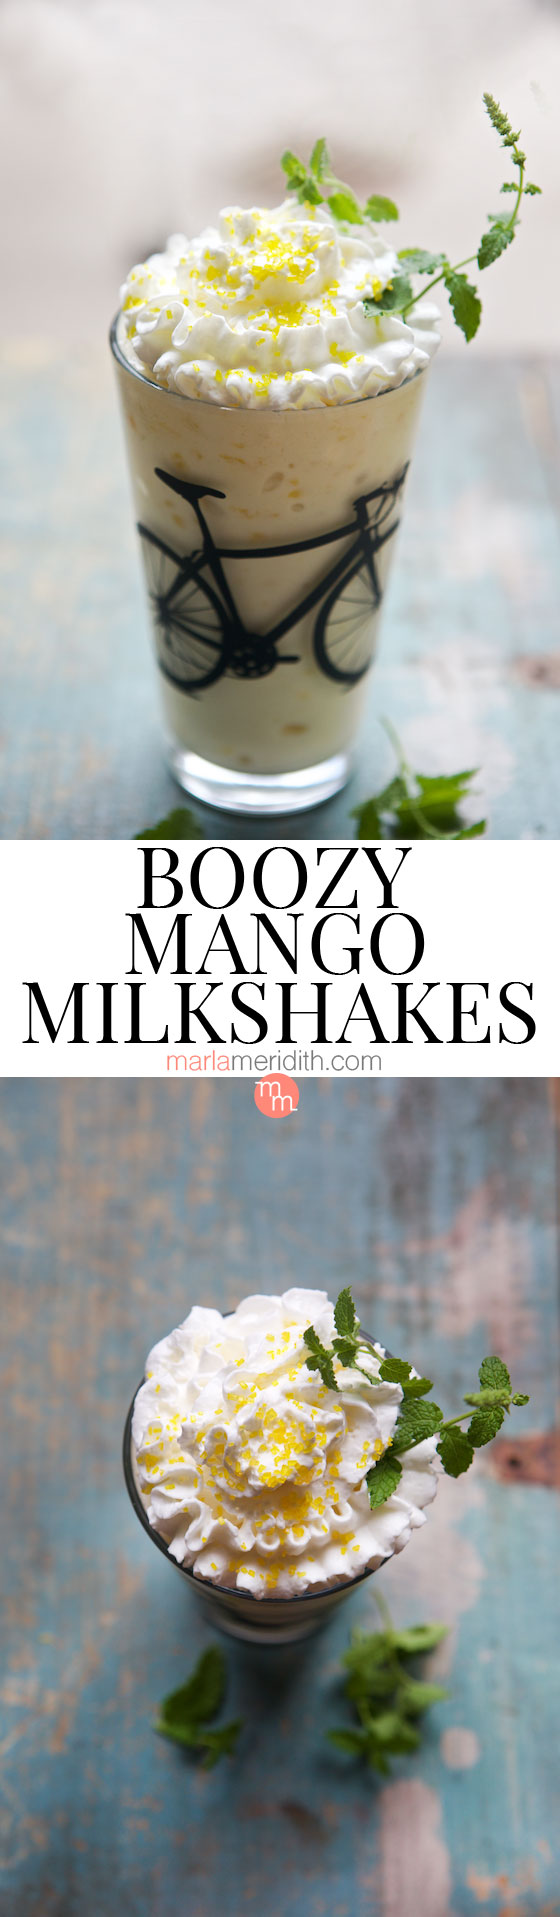 These BOOZY MANGO MILKSHAKES are all kinds of fun on a hot summer day! MarlaMeridith.com ( @marlameridith )